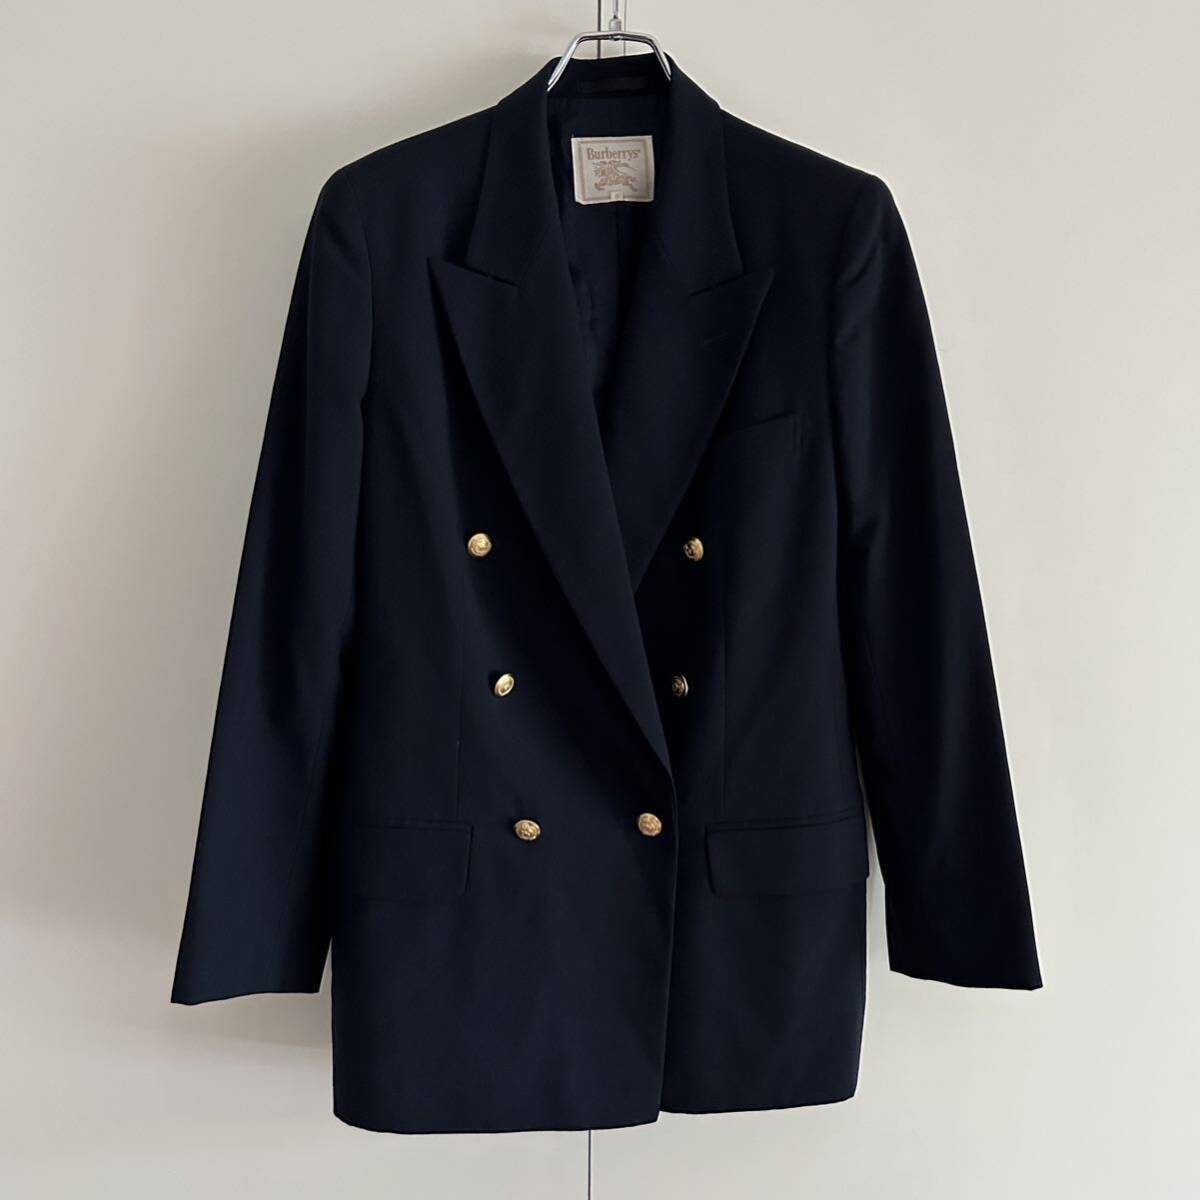 80s 90s Burberrys Burberry z Burberry double breast tailored jacket blaser navy 11 gold button navy blue blur old clothes 